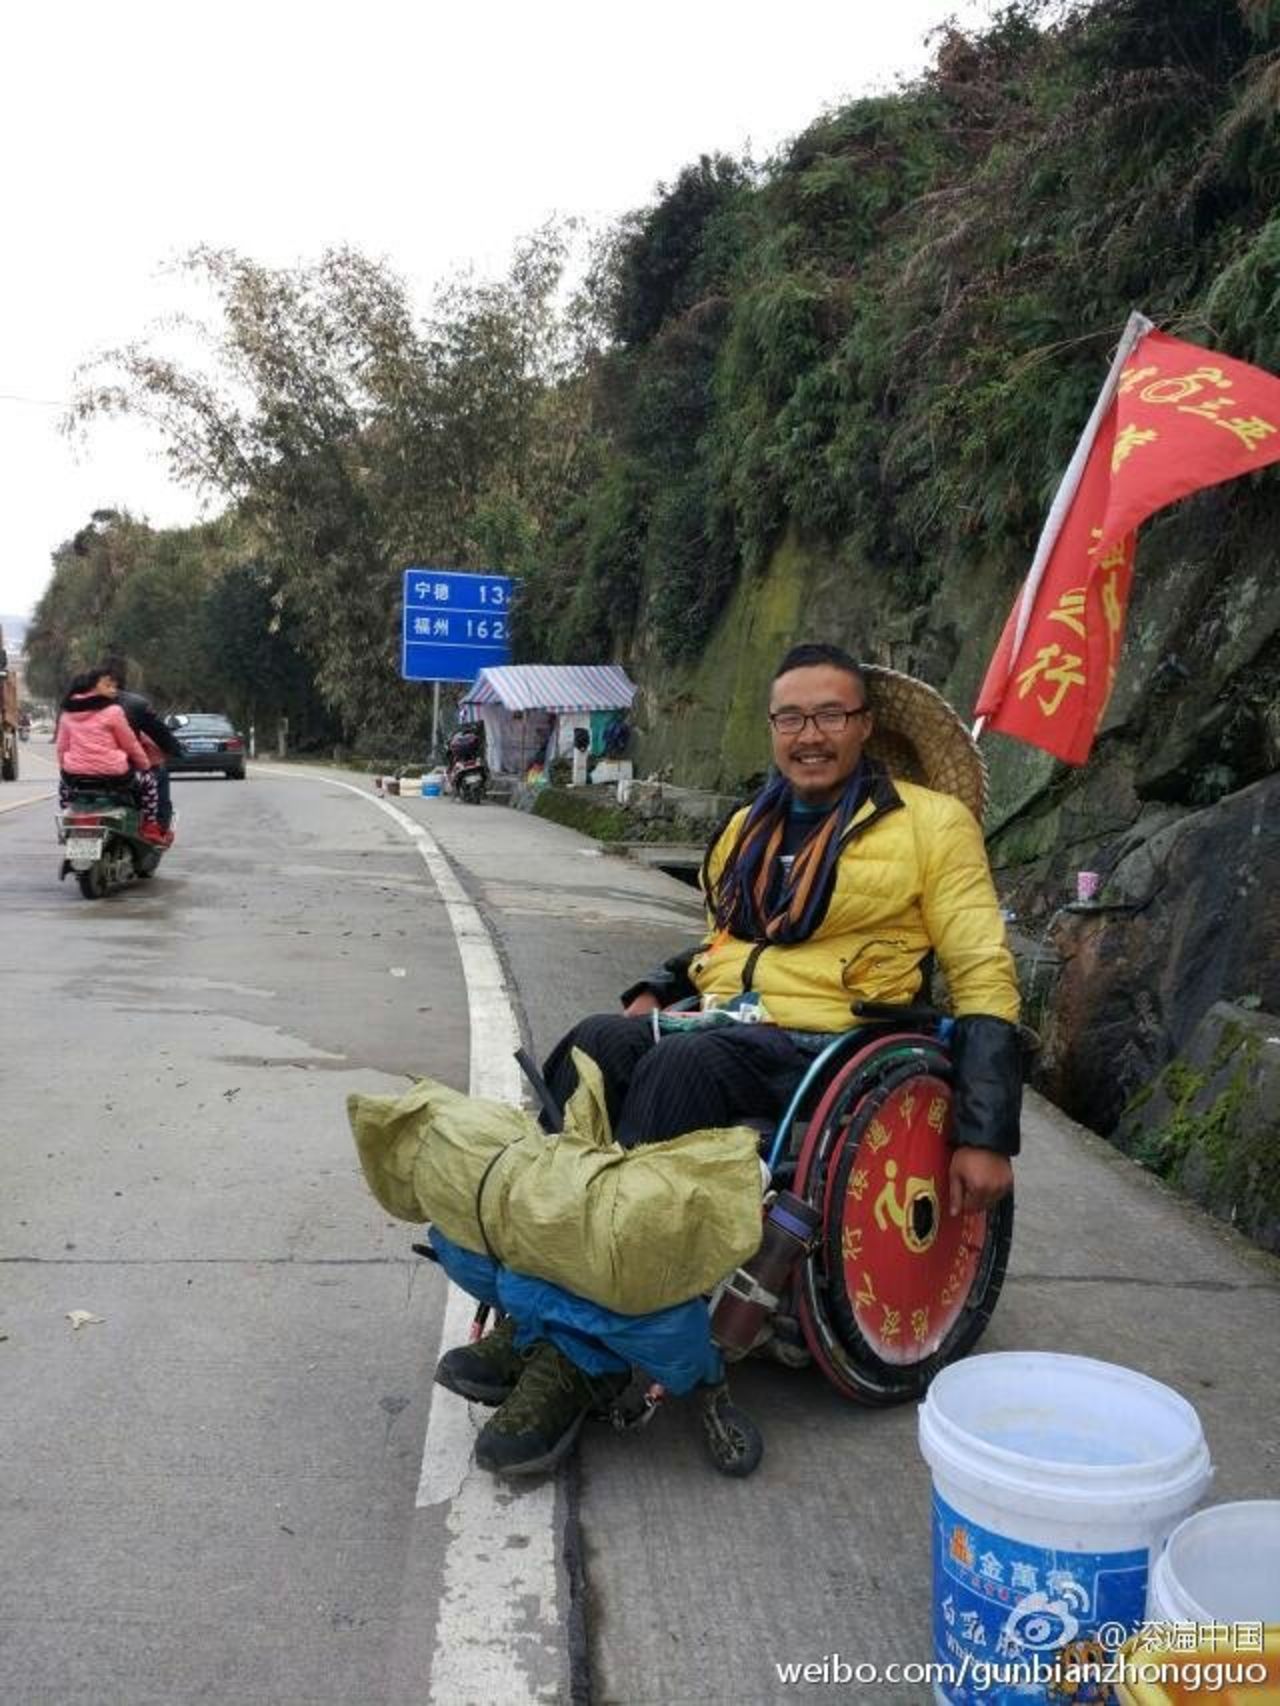 The goal of his trip is to highlight the lack of facilities for the disabled in China.